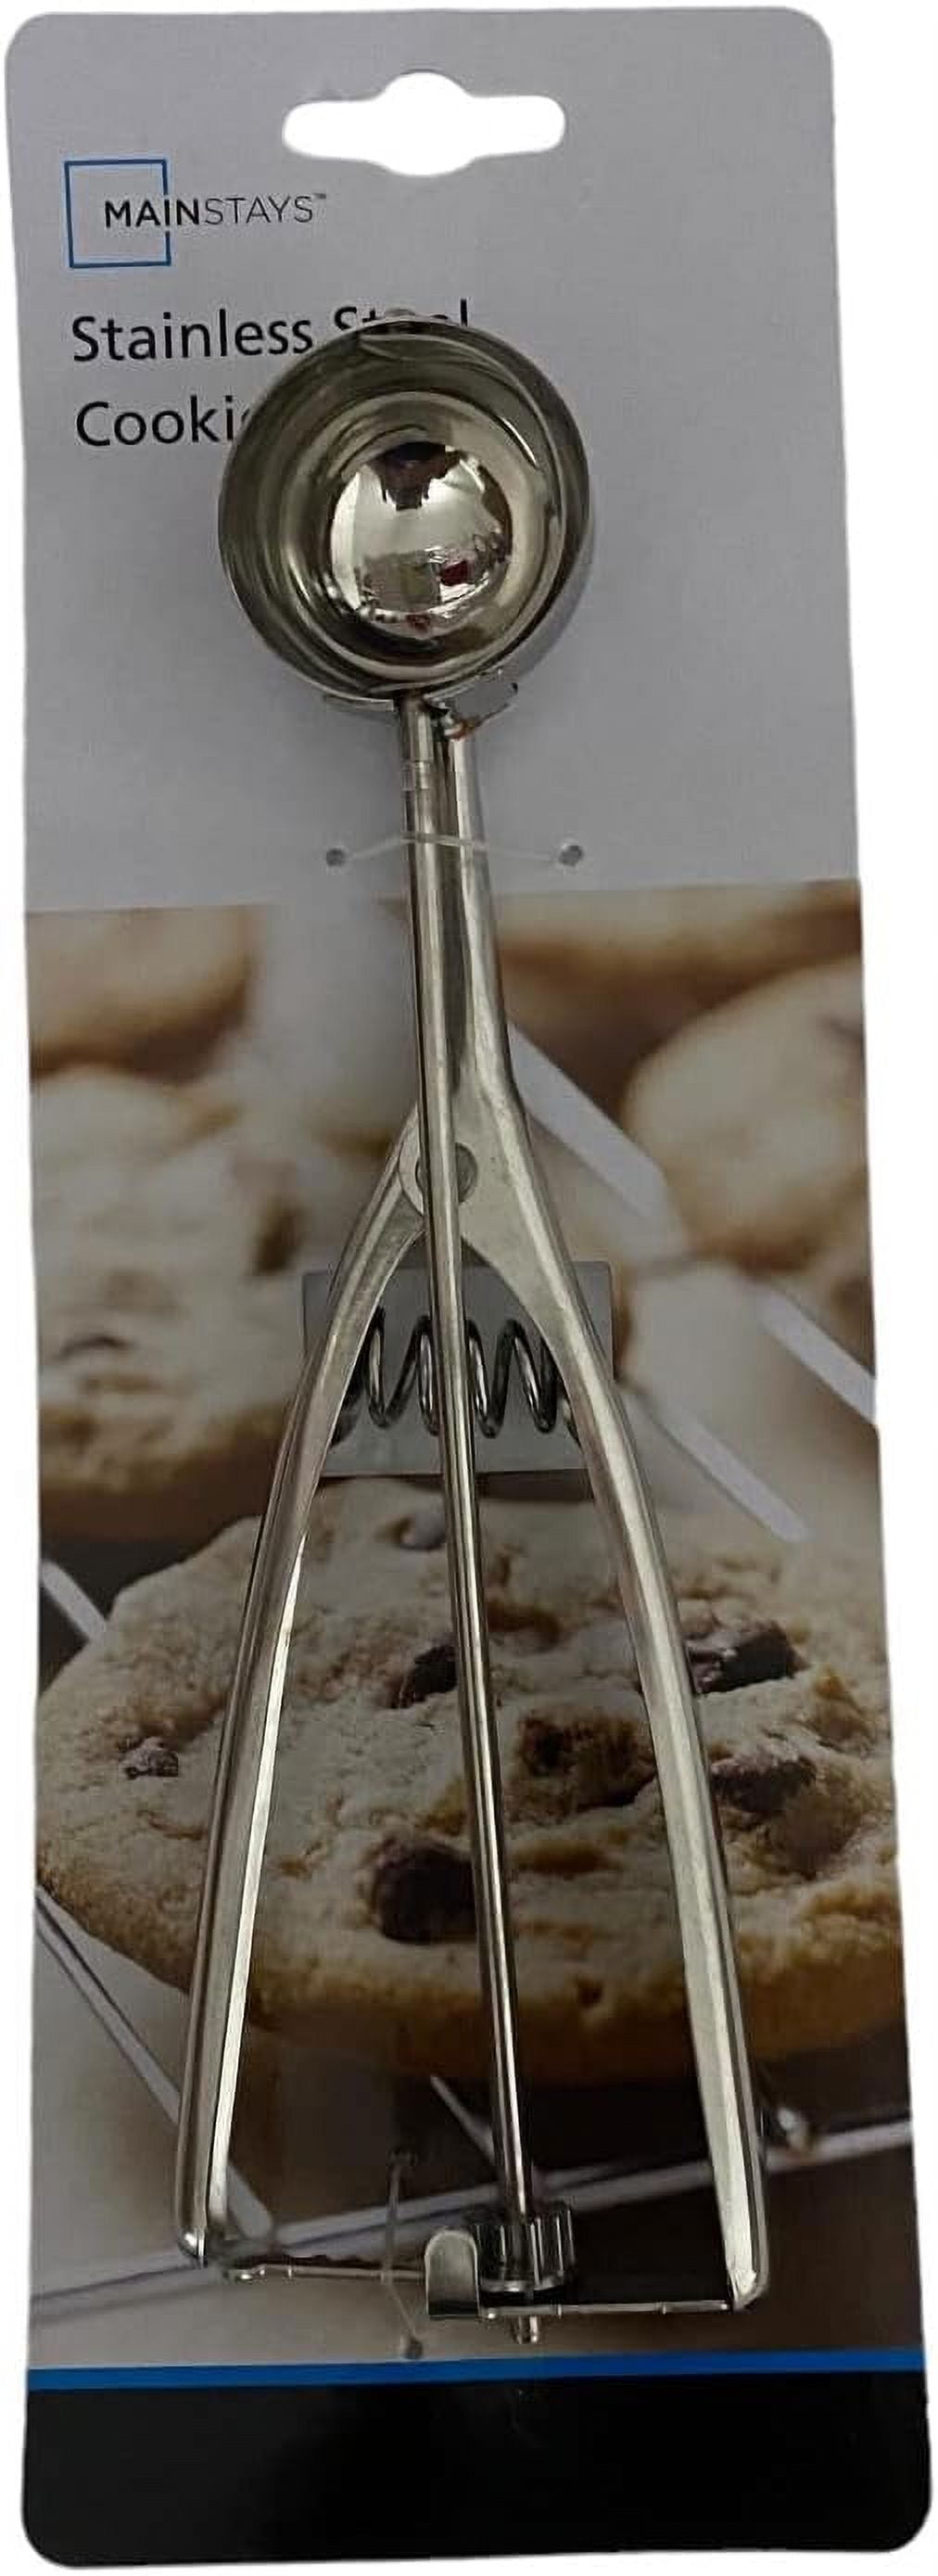 Stainless Steel Ice Cream Scoop with Trigger - #8 Stainless Steel Ice Scoops for Cookie Dough Measuring Scoops Metal Cup Cake Makers- 4 oz Portion